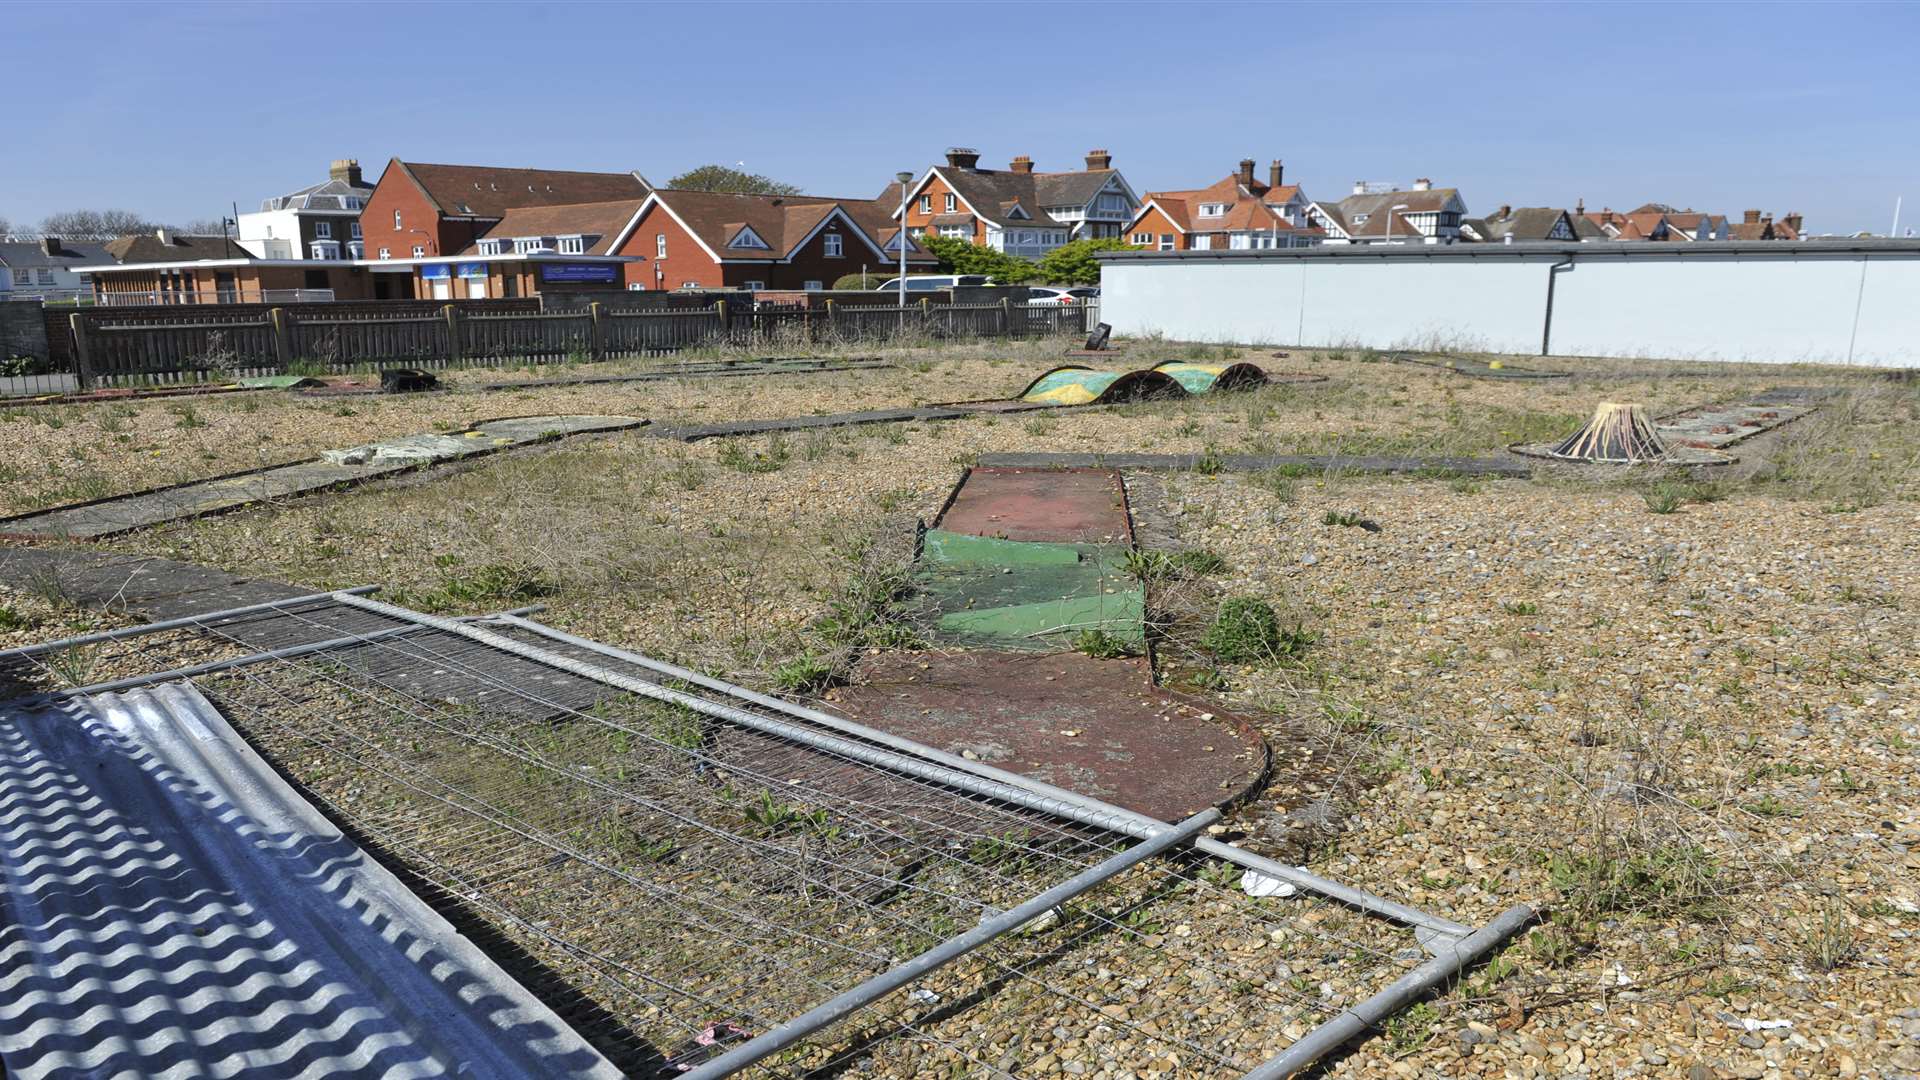 Walmer's former crazy golf course could soon be home to eleven beach huts